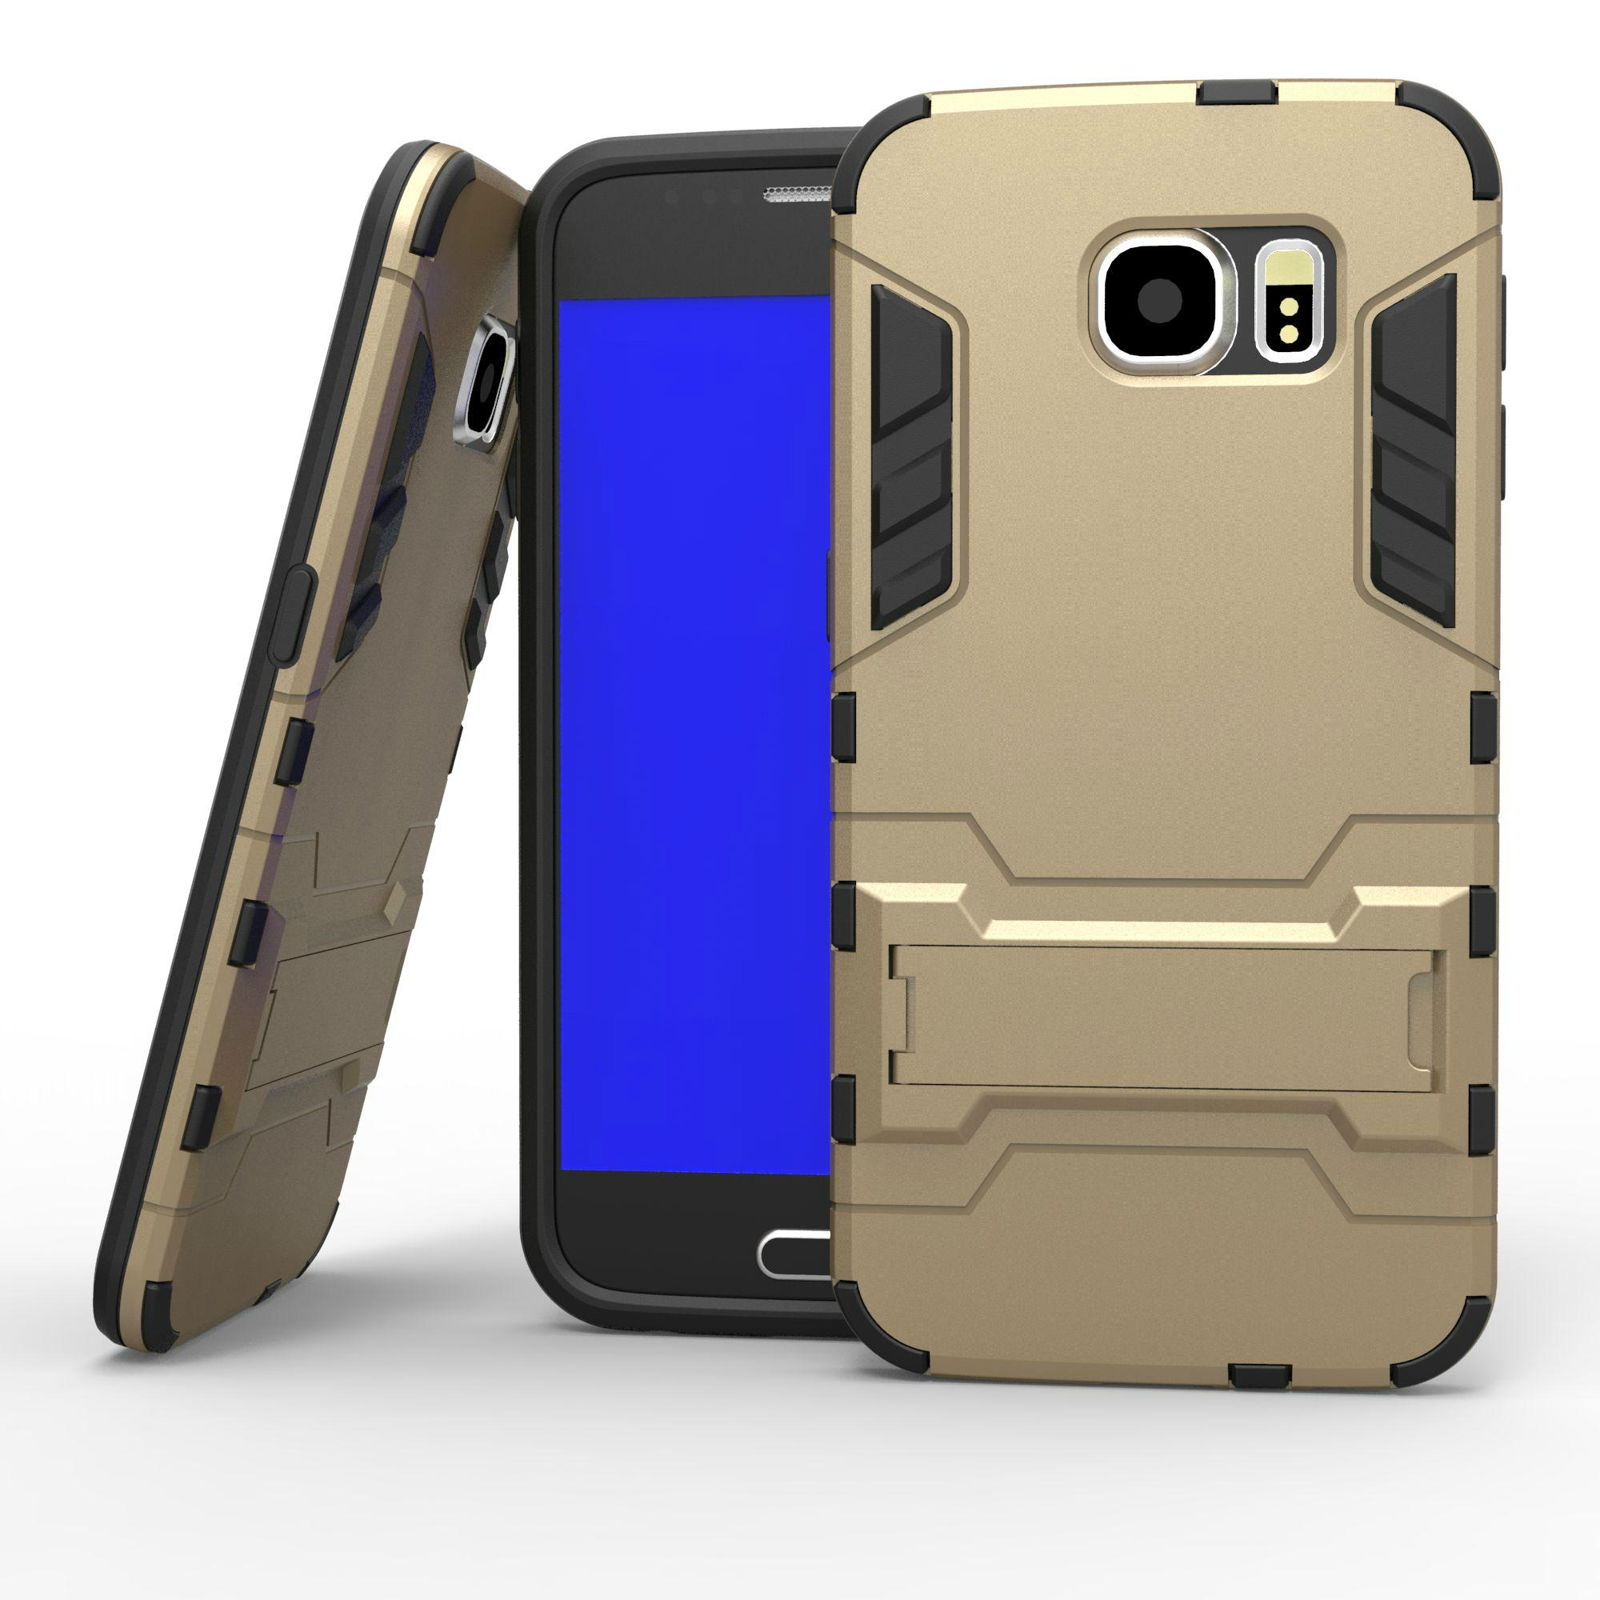 Anti Shock Armor Silicone Case TPU PC Cover With KickStand for galaxy s6  2